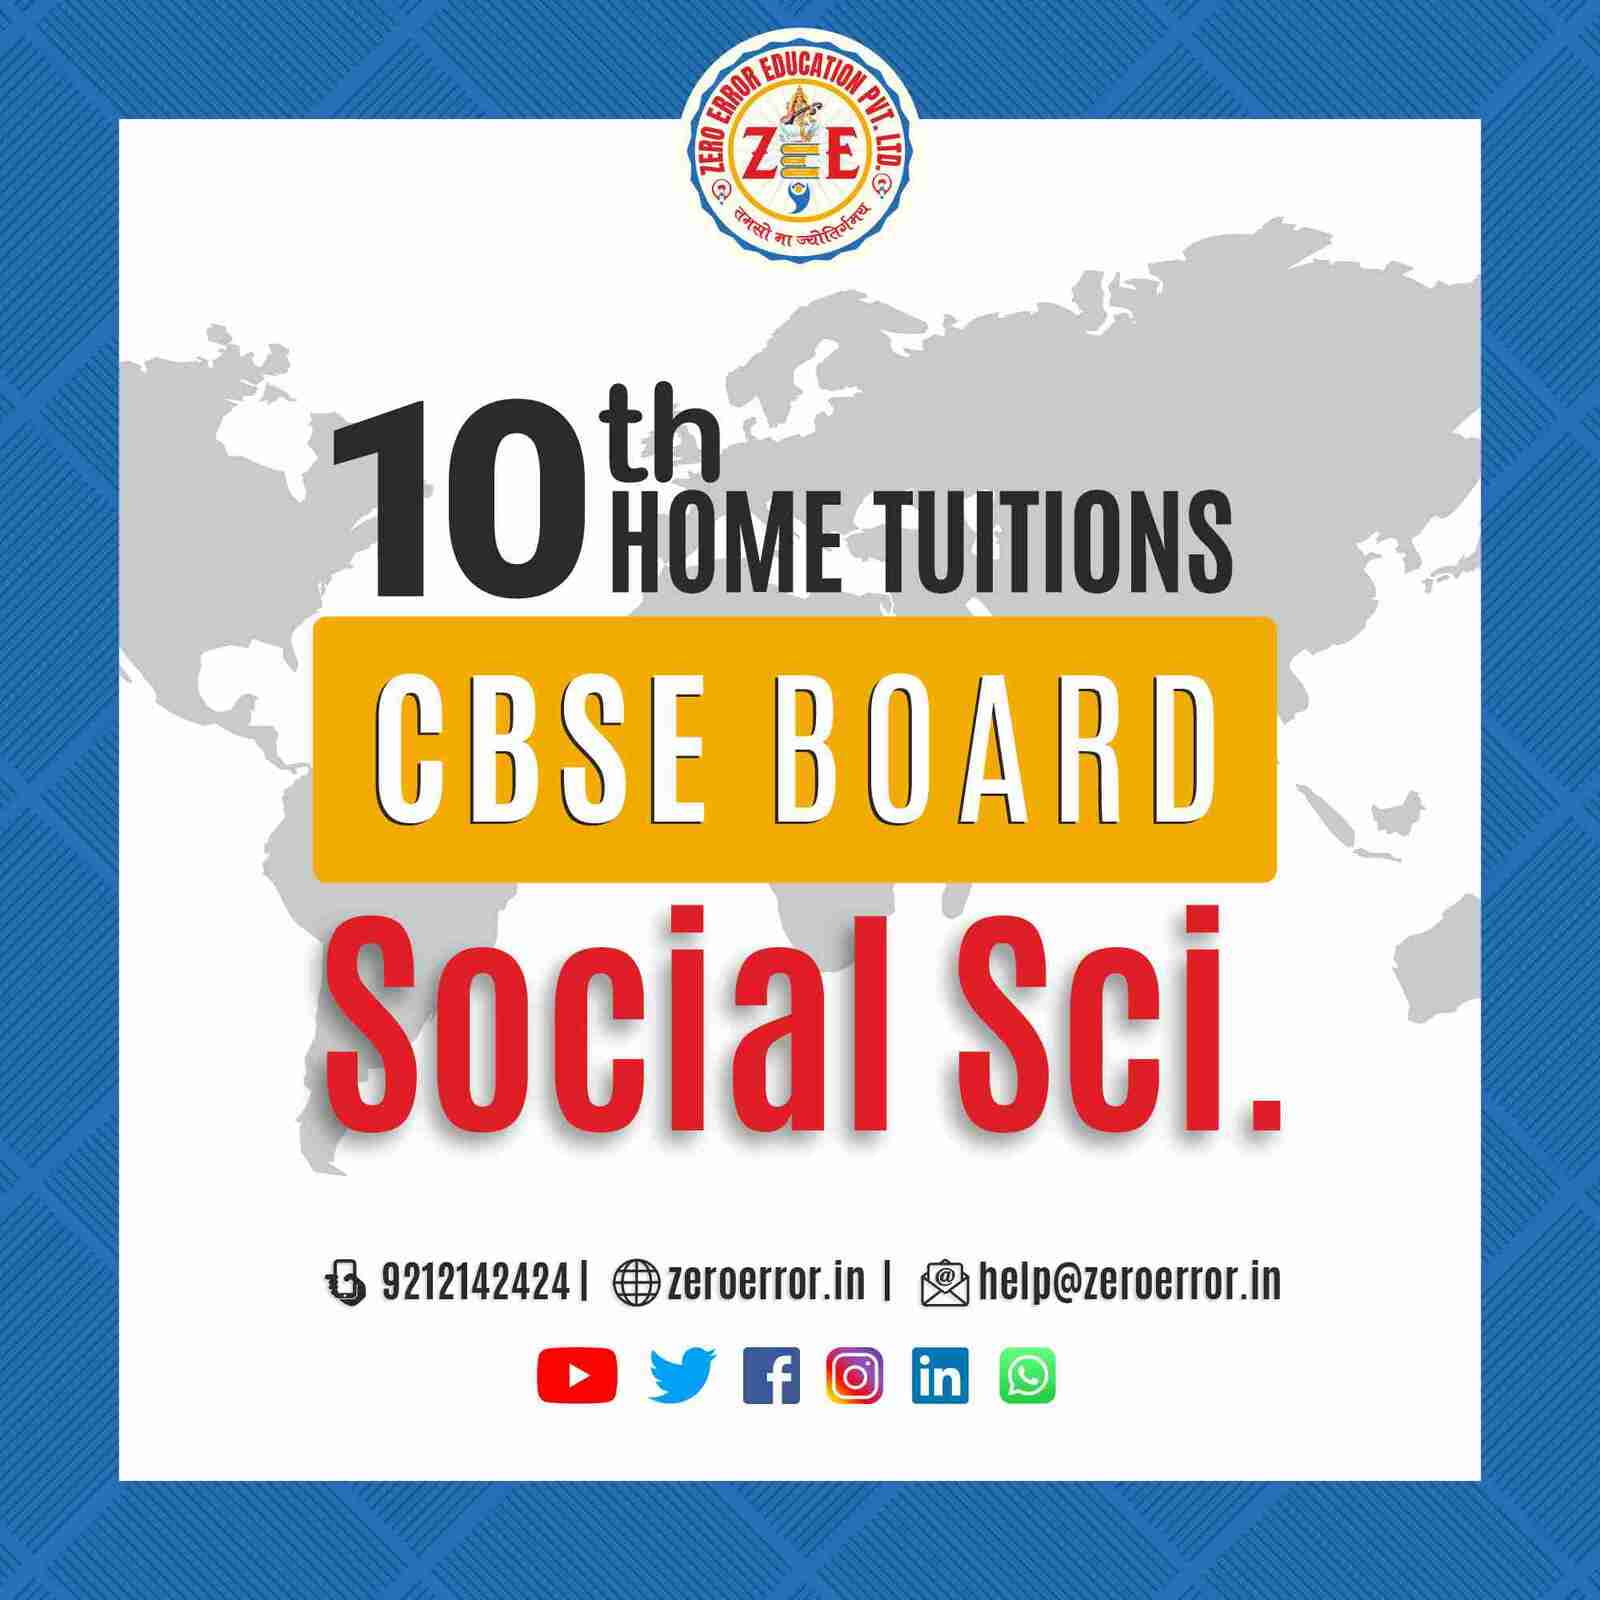 10th Grade CBSE Social Science Online Classes by Zero Error Education Prepare for your CBSE board exams with online and offline SST classes for 10th grade. Learn from experienced home tutors and get all the help you need to succeed. Enroll today at Zero Error Education. [https://zeroerror.in/] Call 9212142424 for more information.